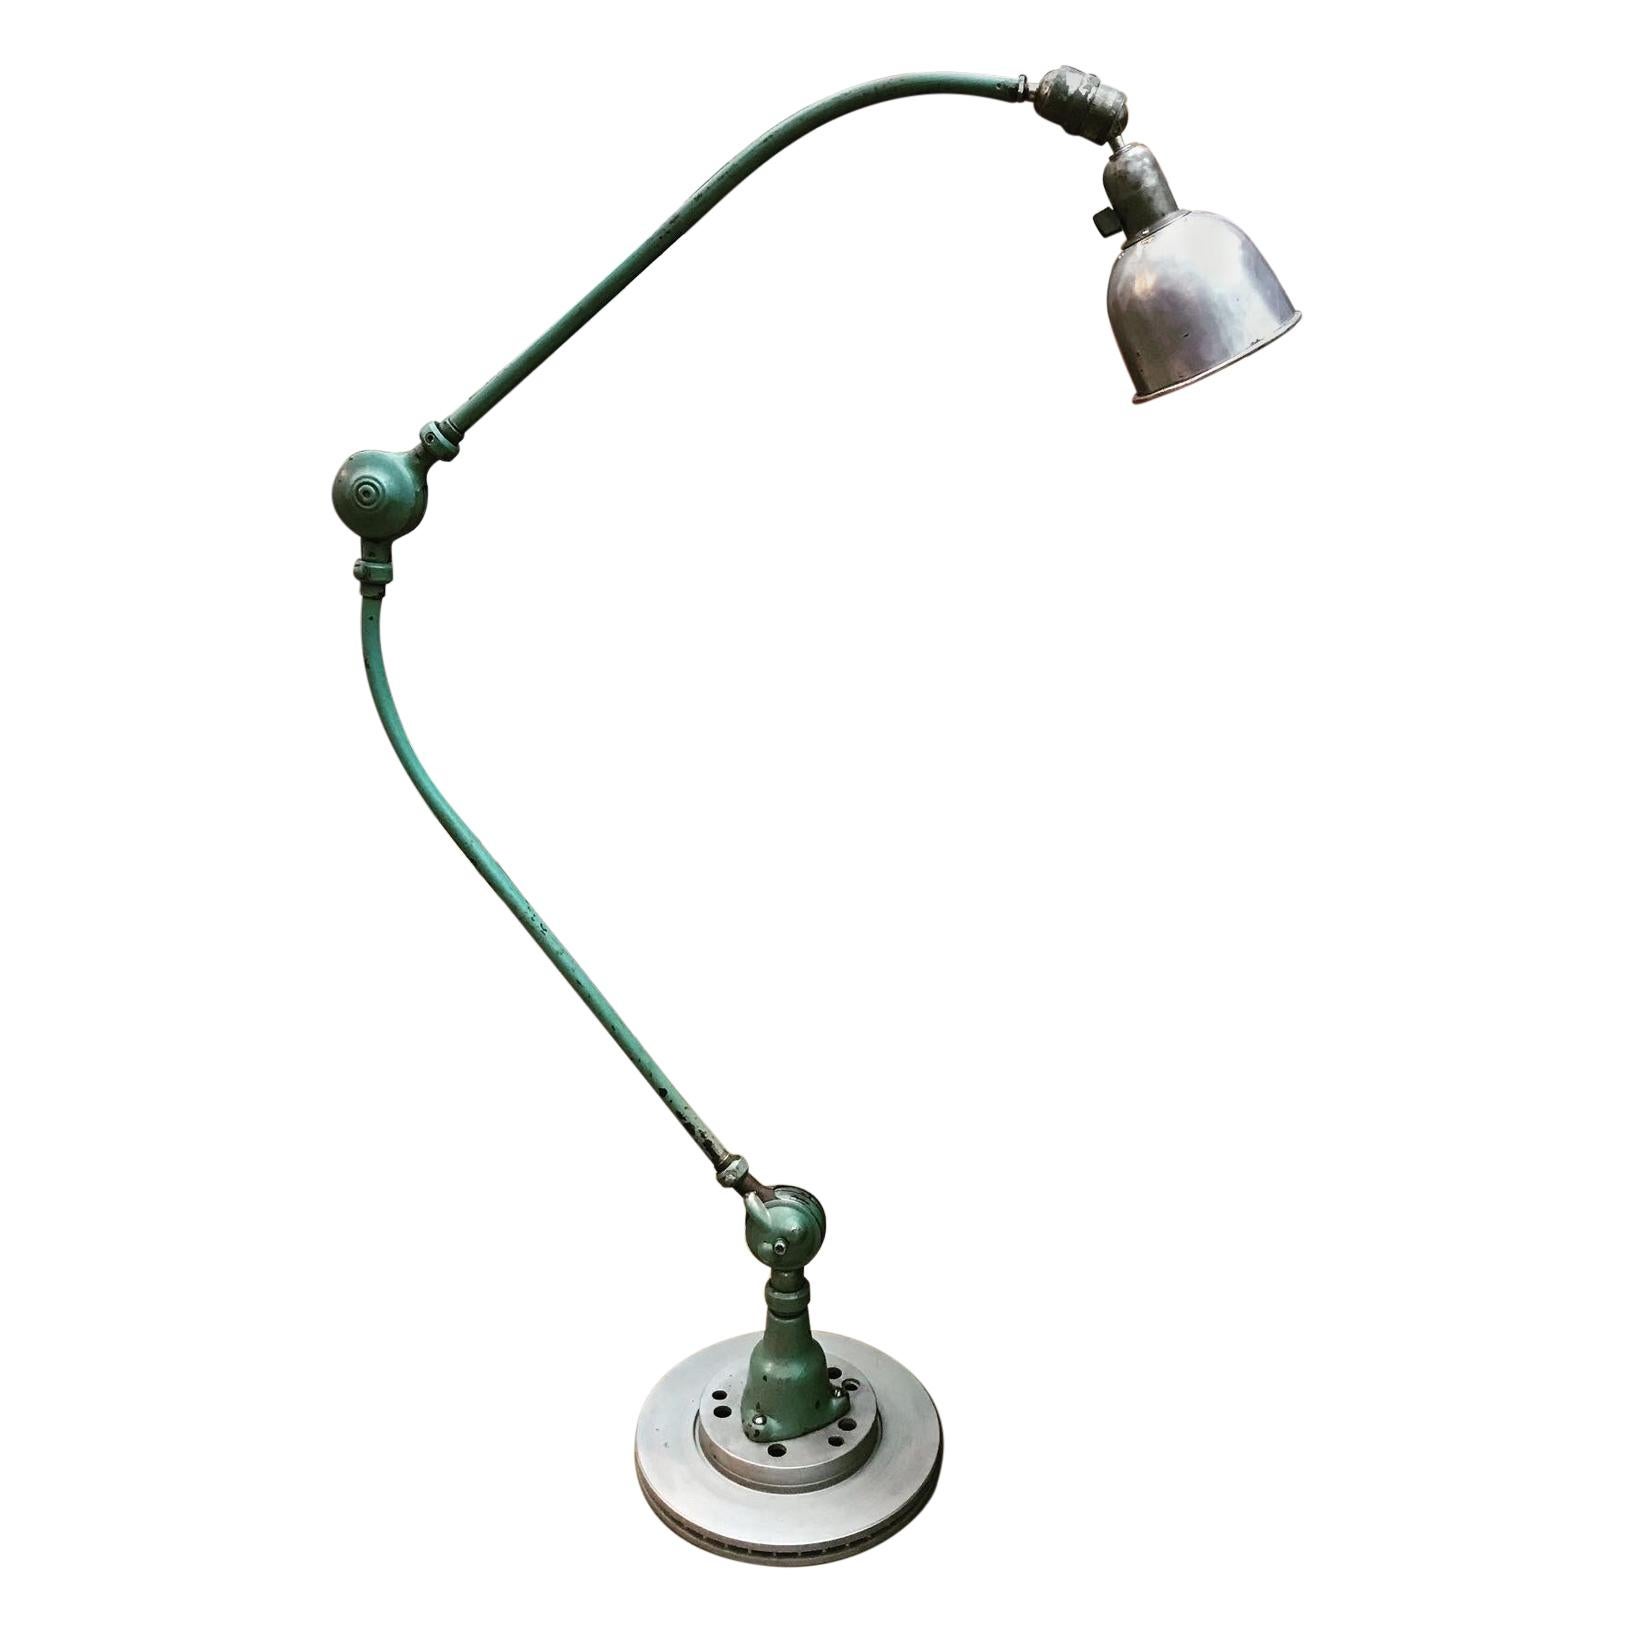 Iconic Vintage Triplex Industrial Lamp by Johan Petter Johansson for ASEA of SE